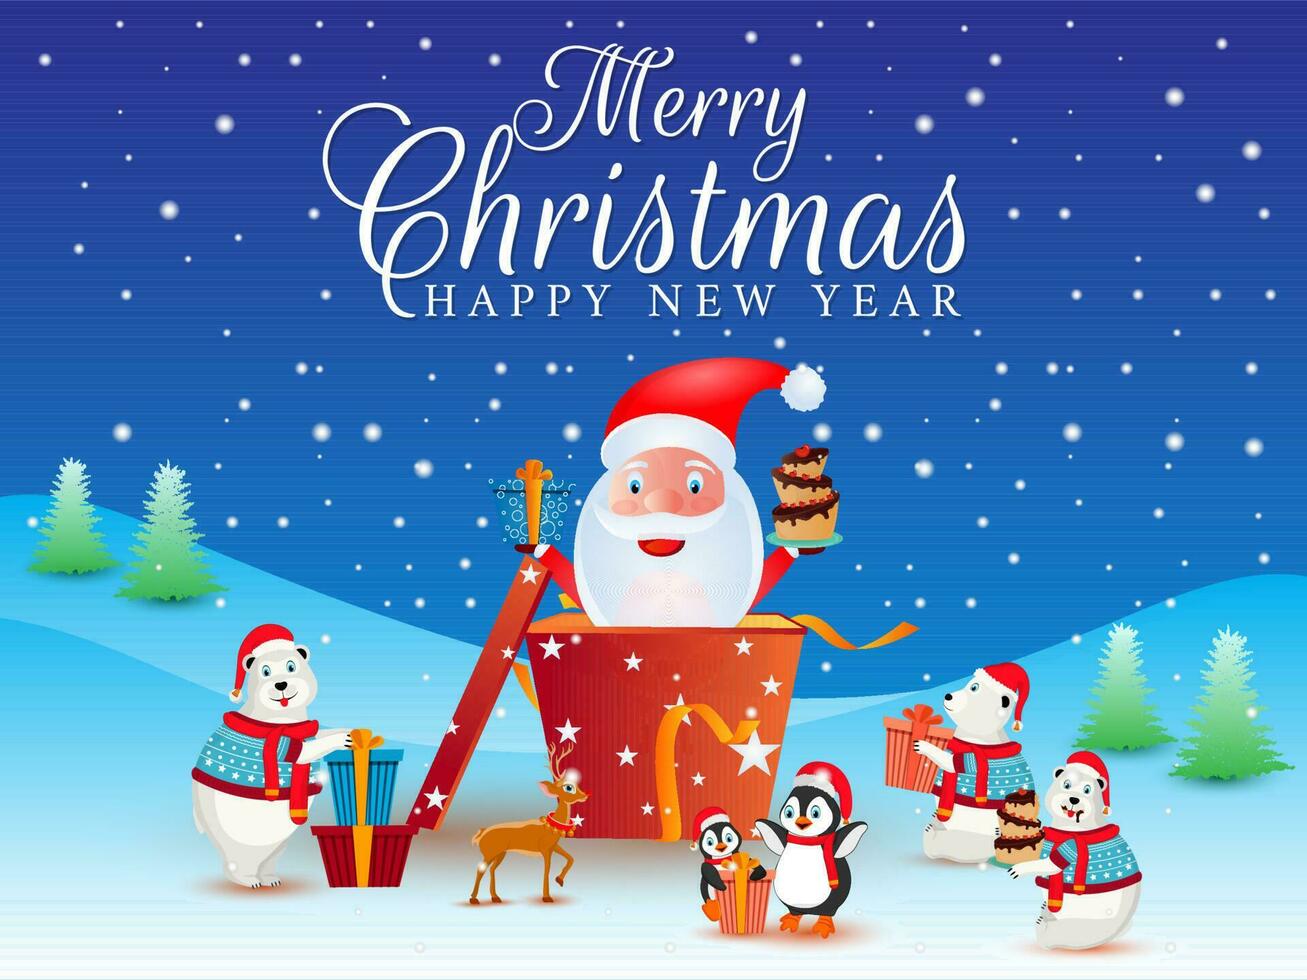 Merry Christmas and Happy New Year greeting card design with illustration of santa claus presenting cake in gift box, penguin, reindeer and polar bear on snowfall background. vector